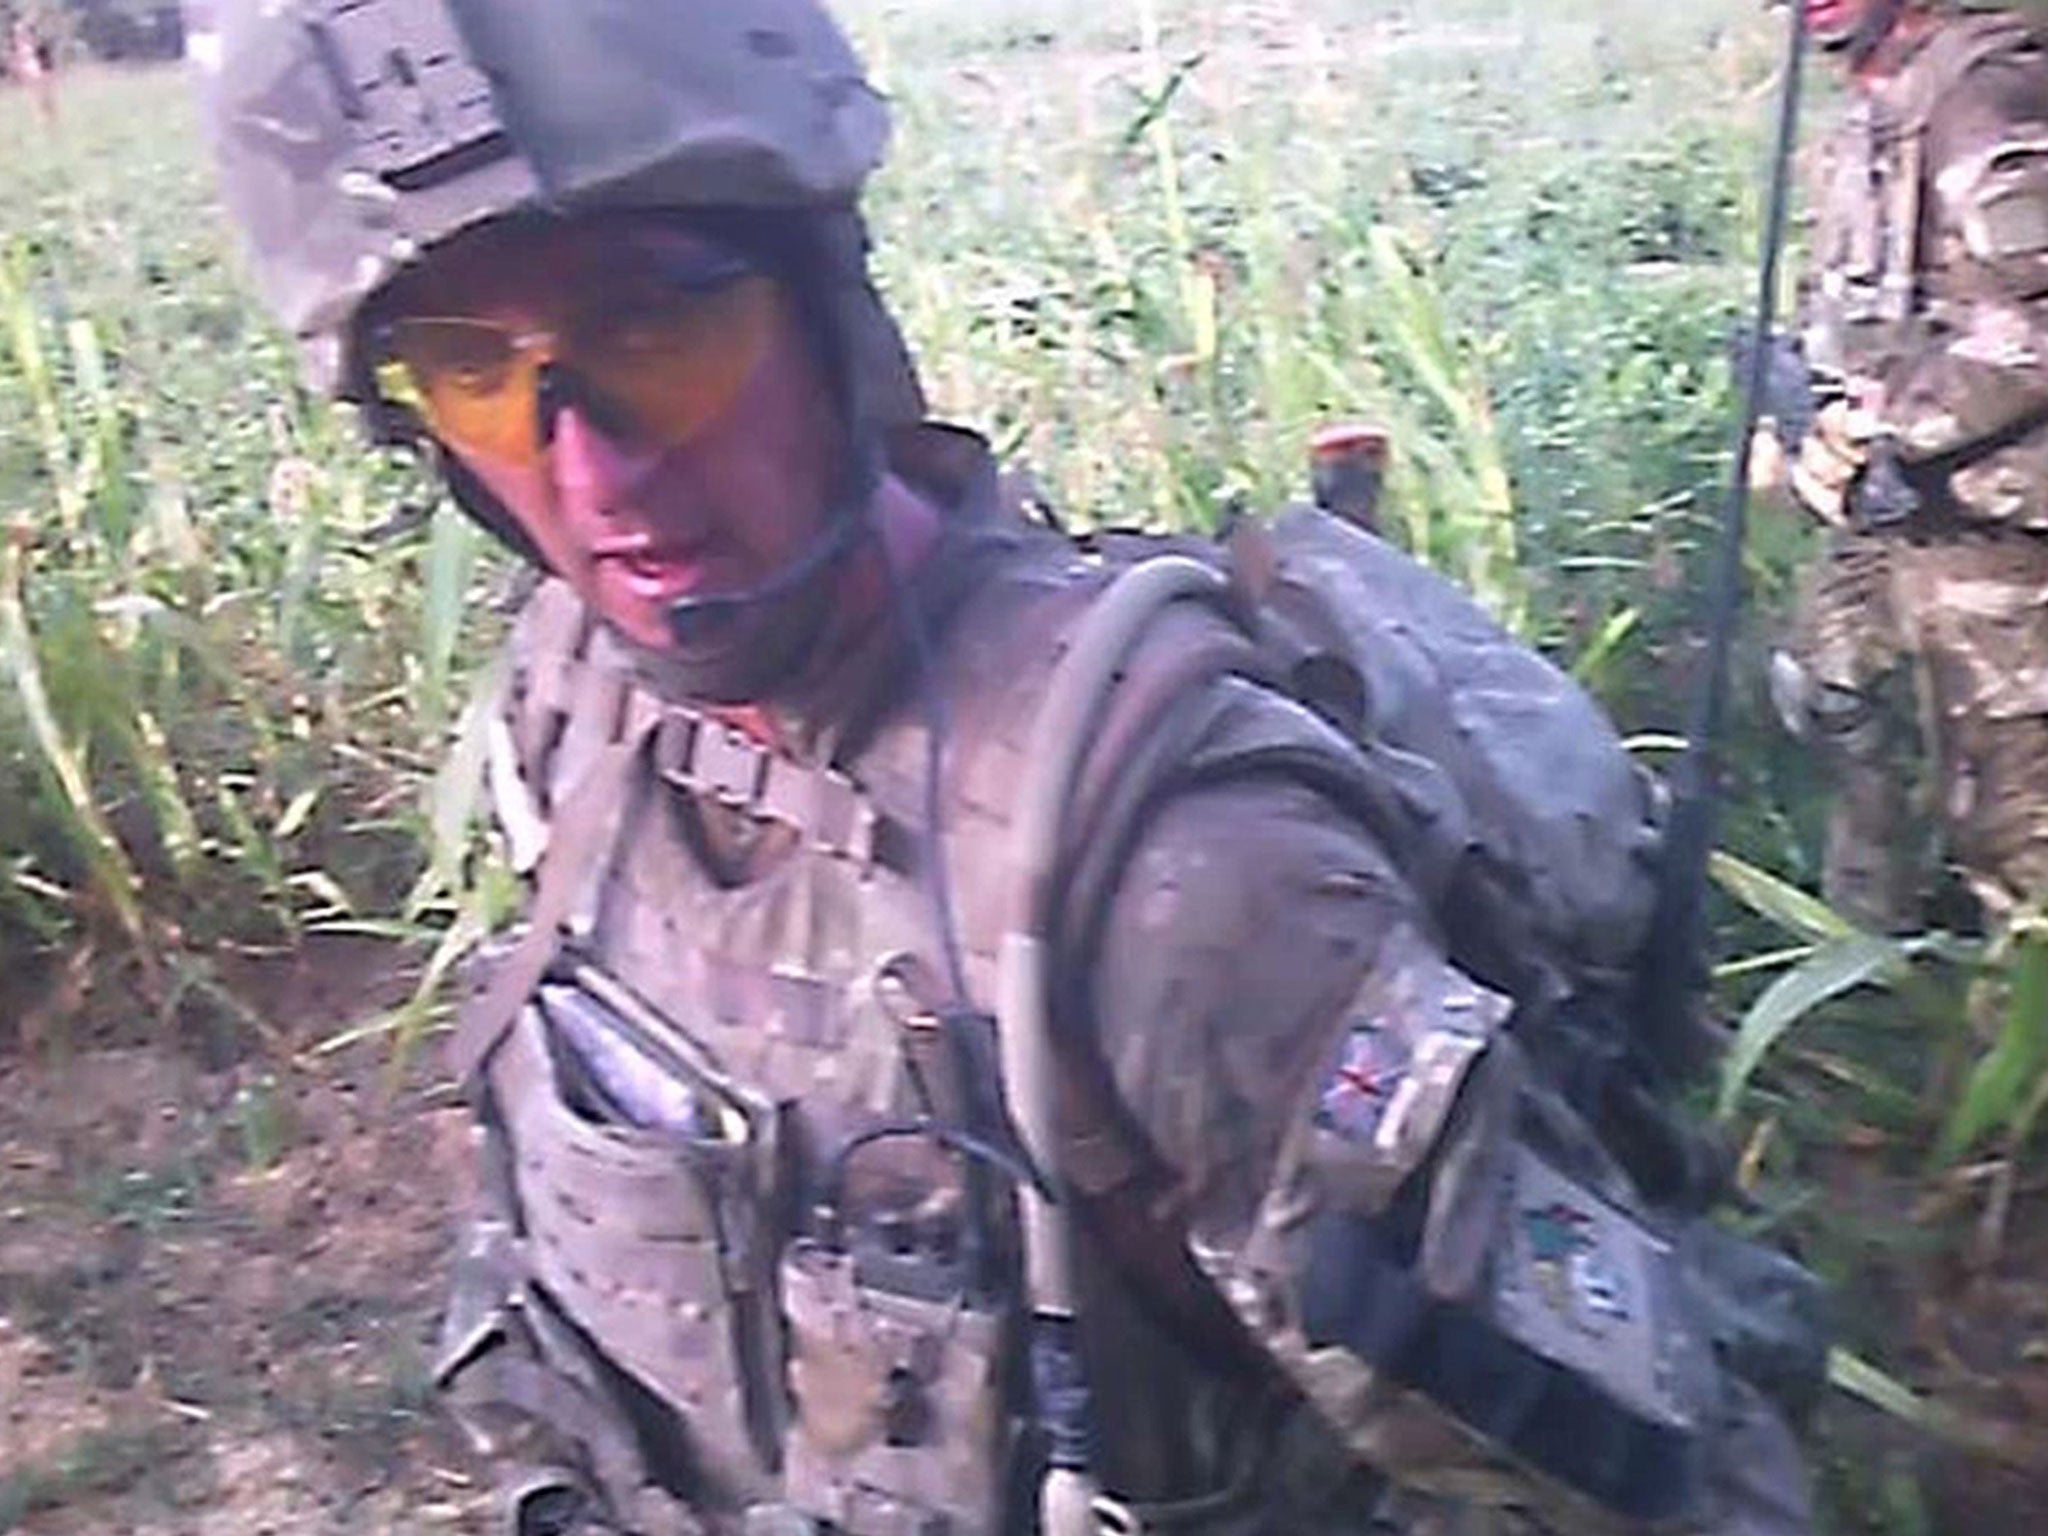 A colleague filmed Sgt Alexander Blackman carrying out the killing in Helmand